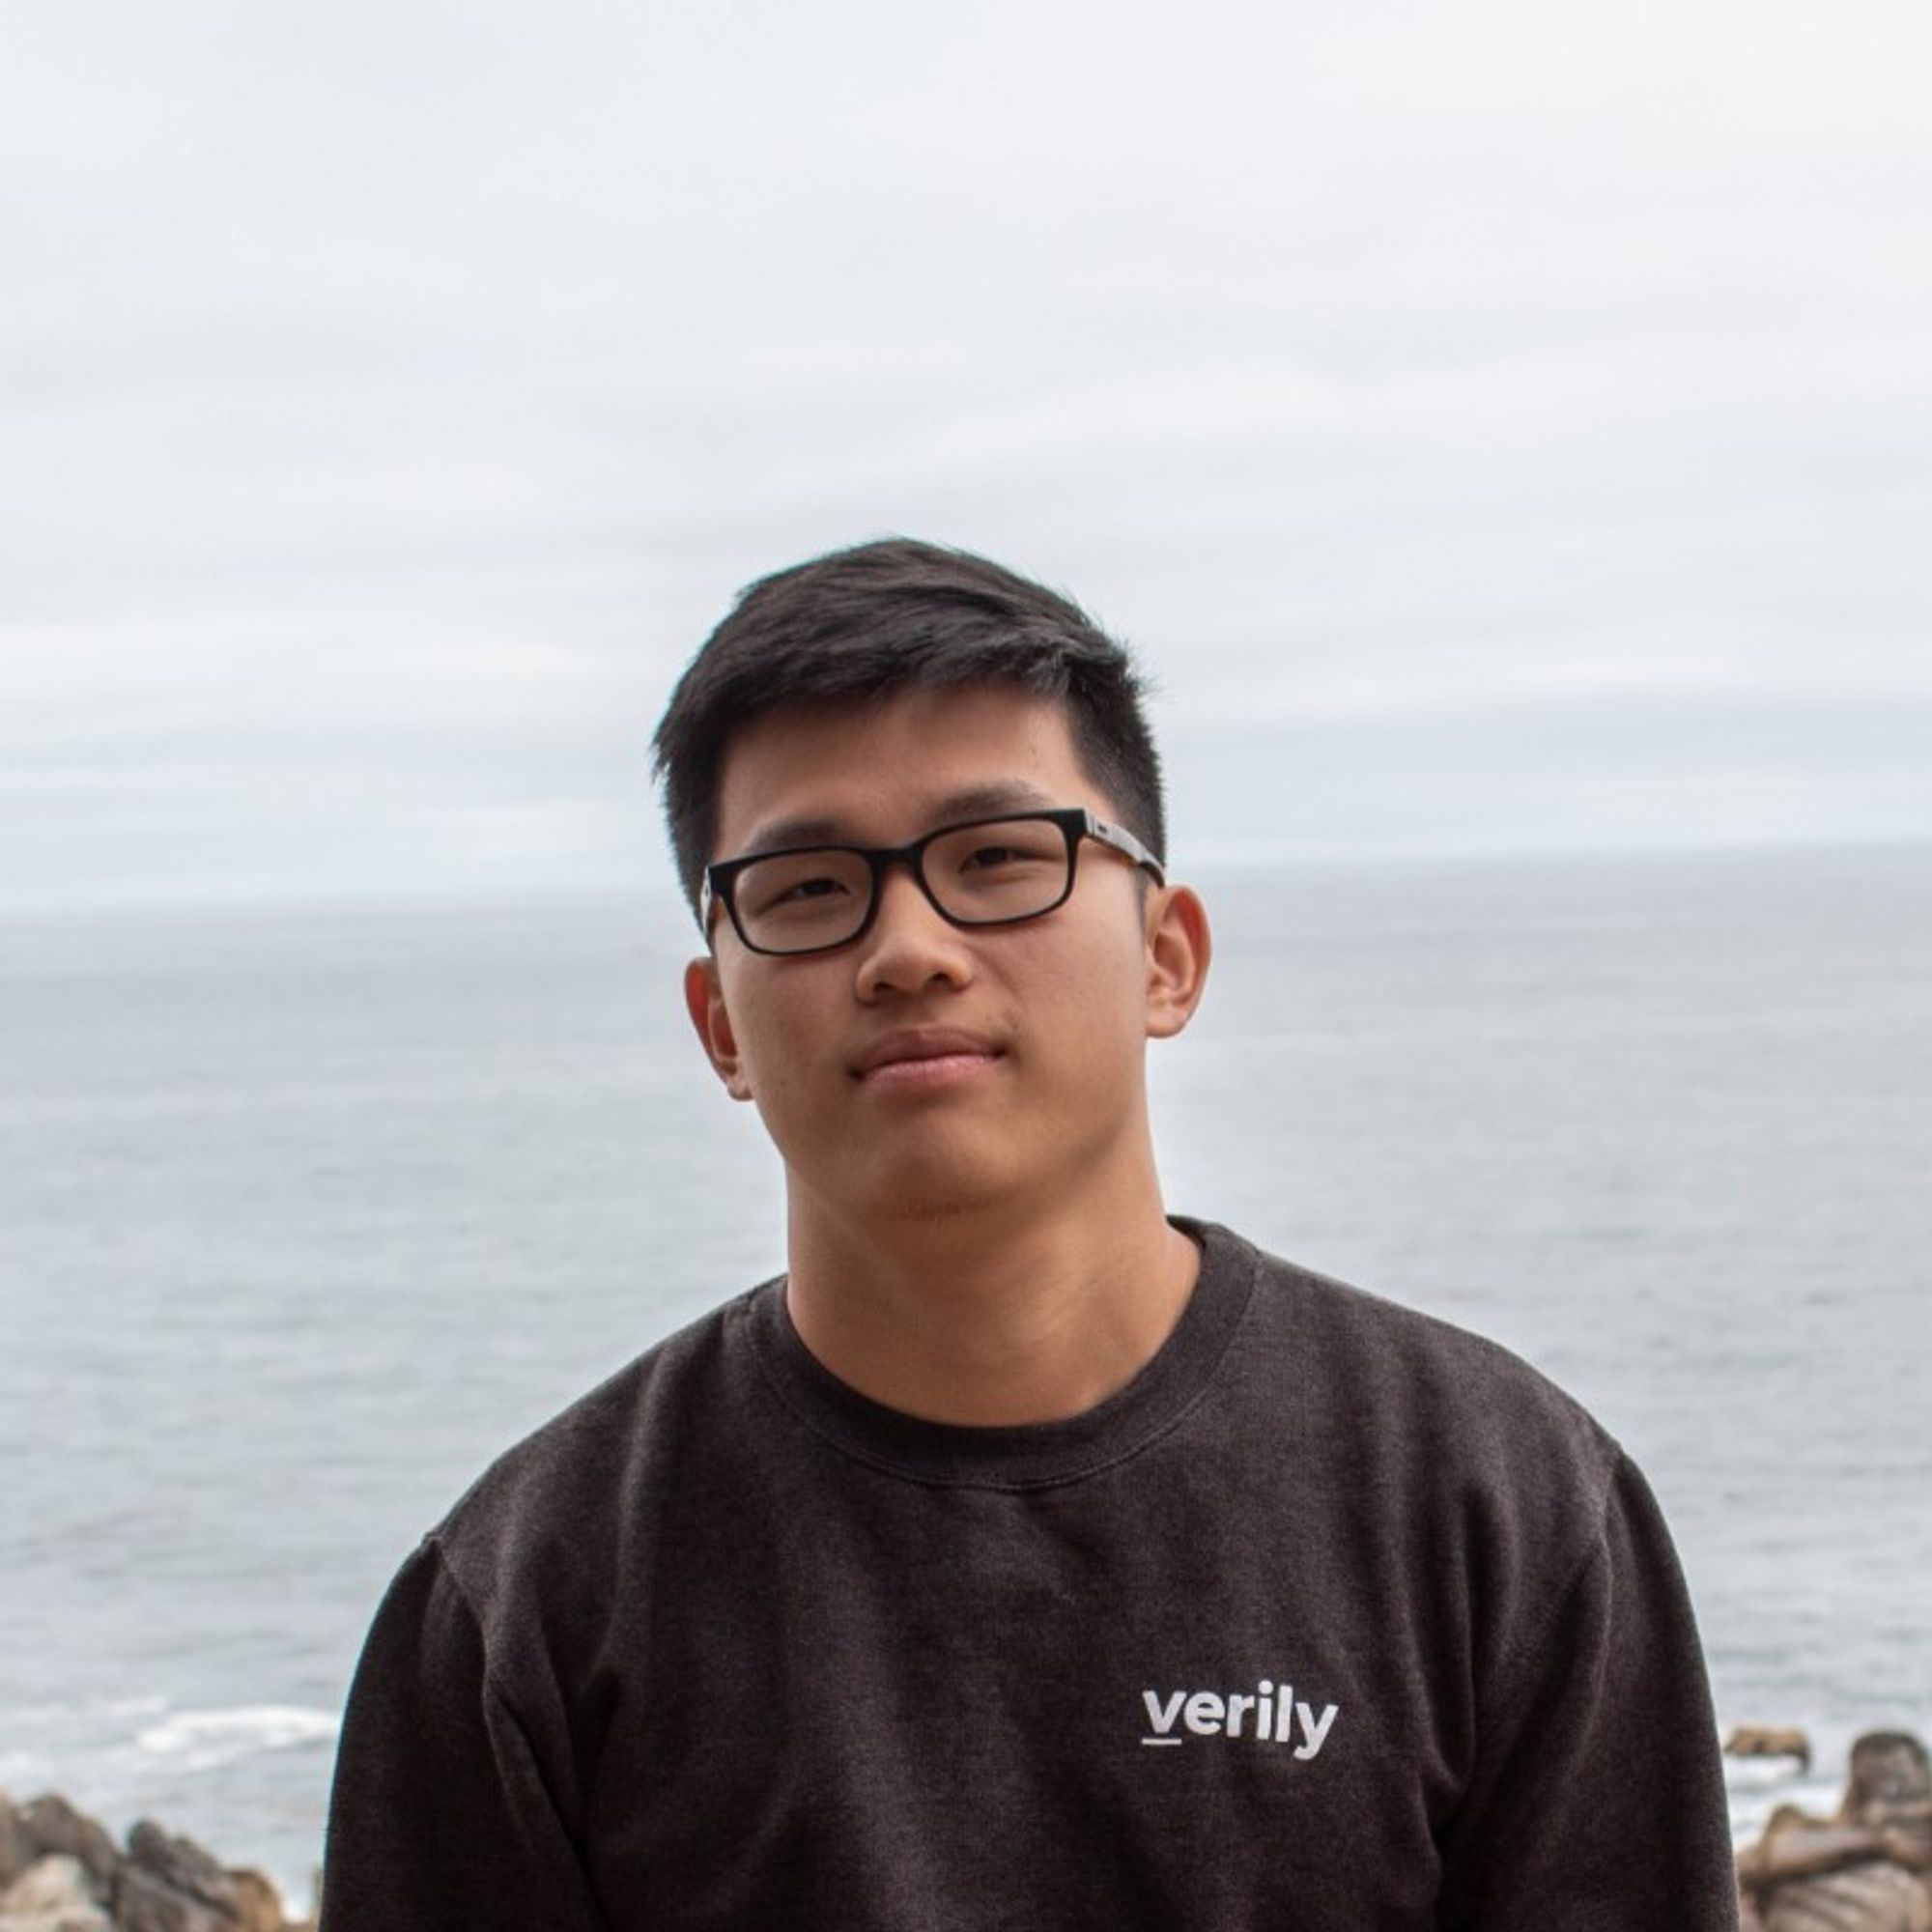 Galen Kimball
Software Engineer
Prior Eng Intern @Amazon, Verily • Loves eating food and picking up new hobbies :)